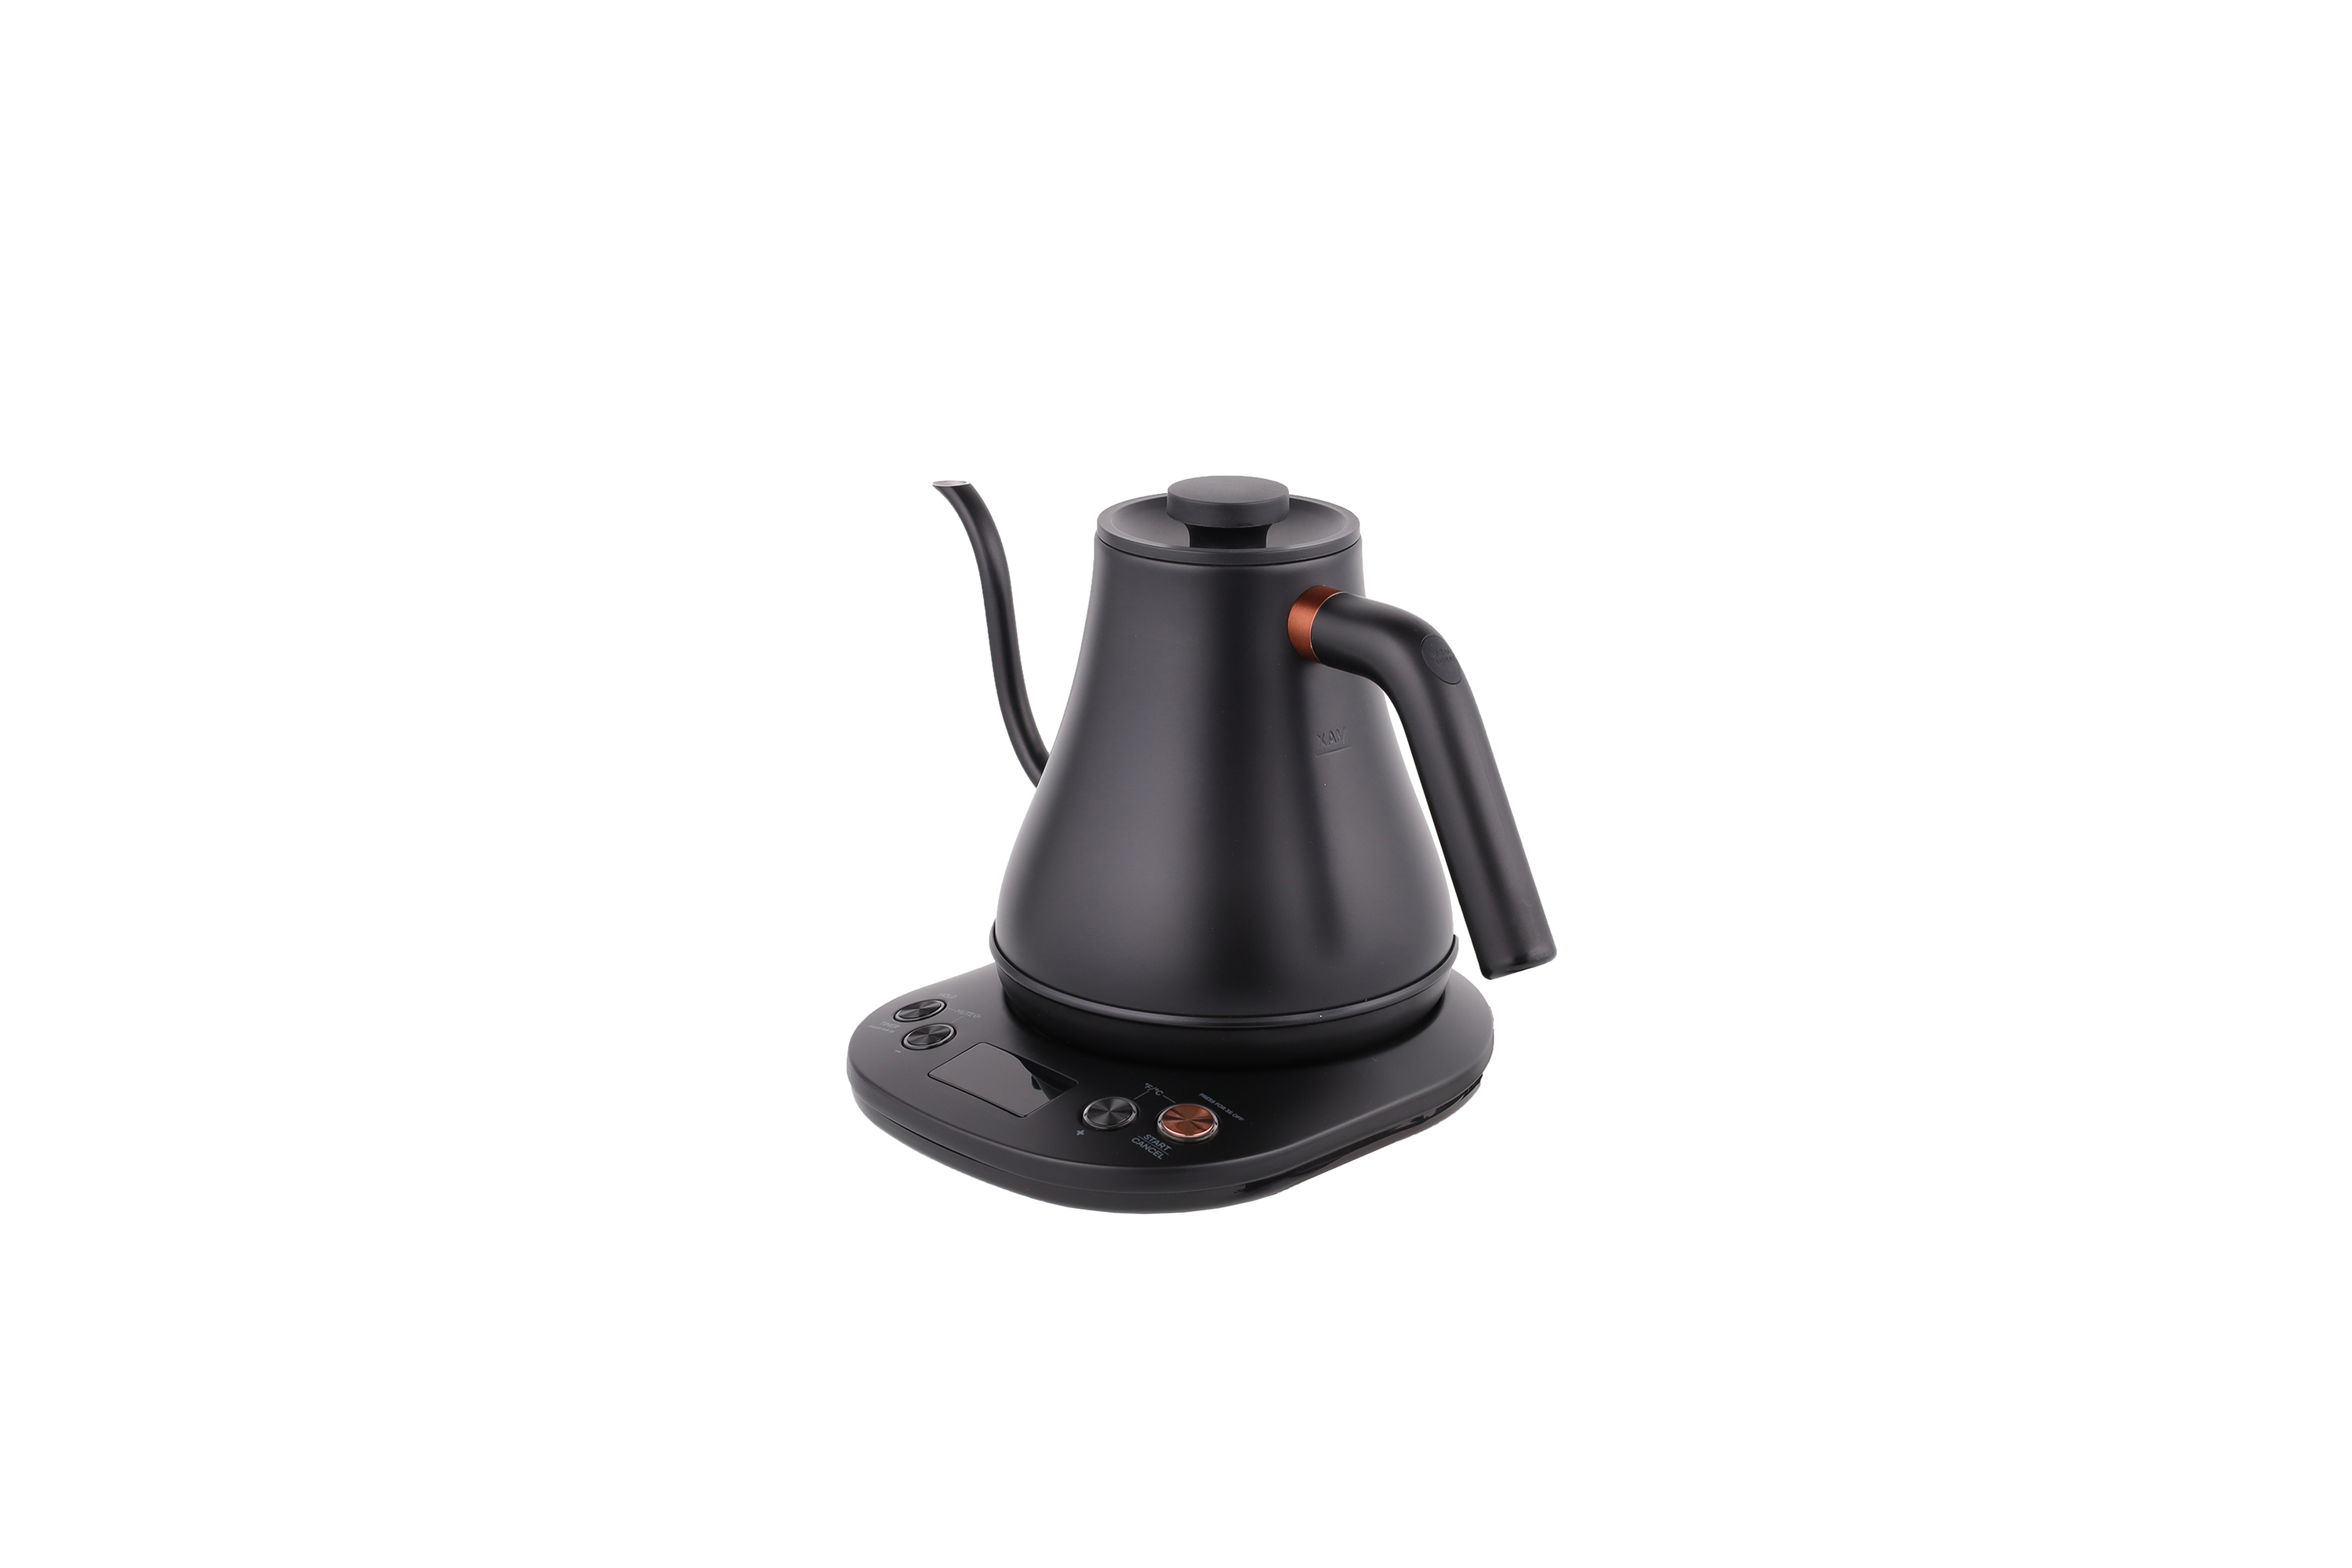  Mecity Electric Gooseneck Kettle With Keep Warm